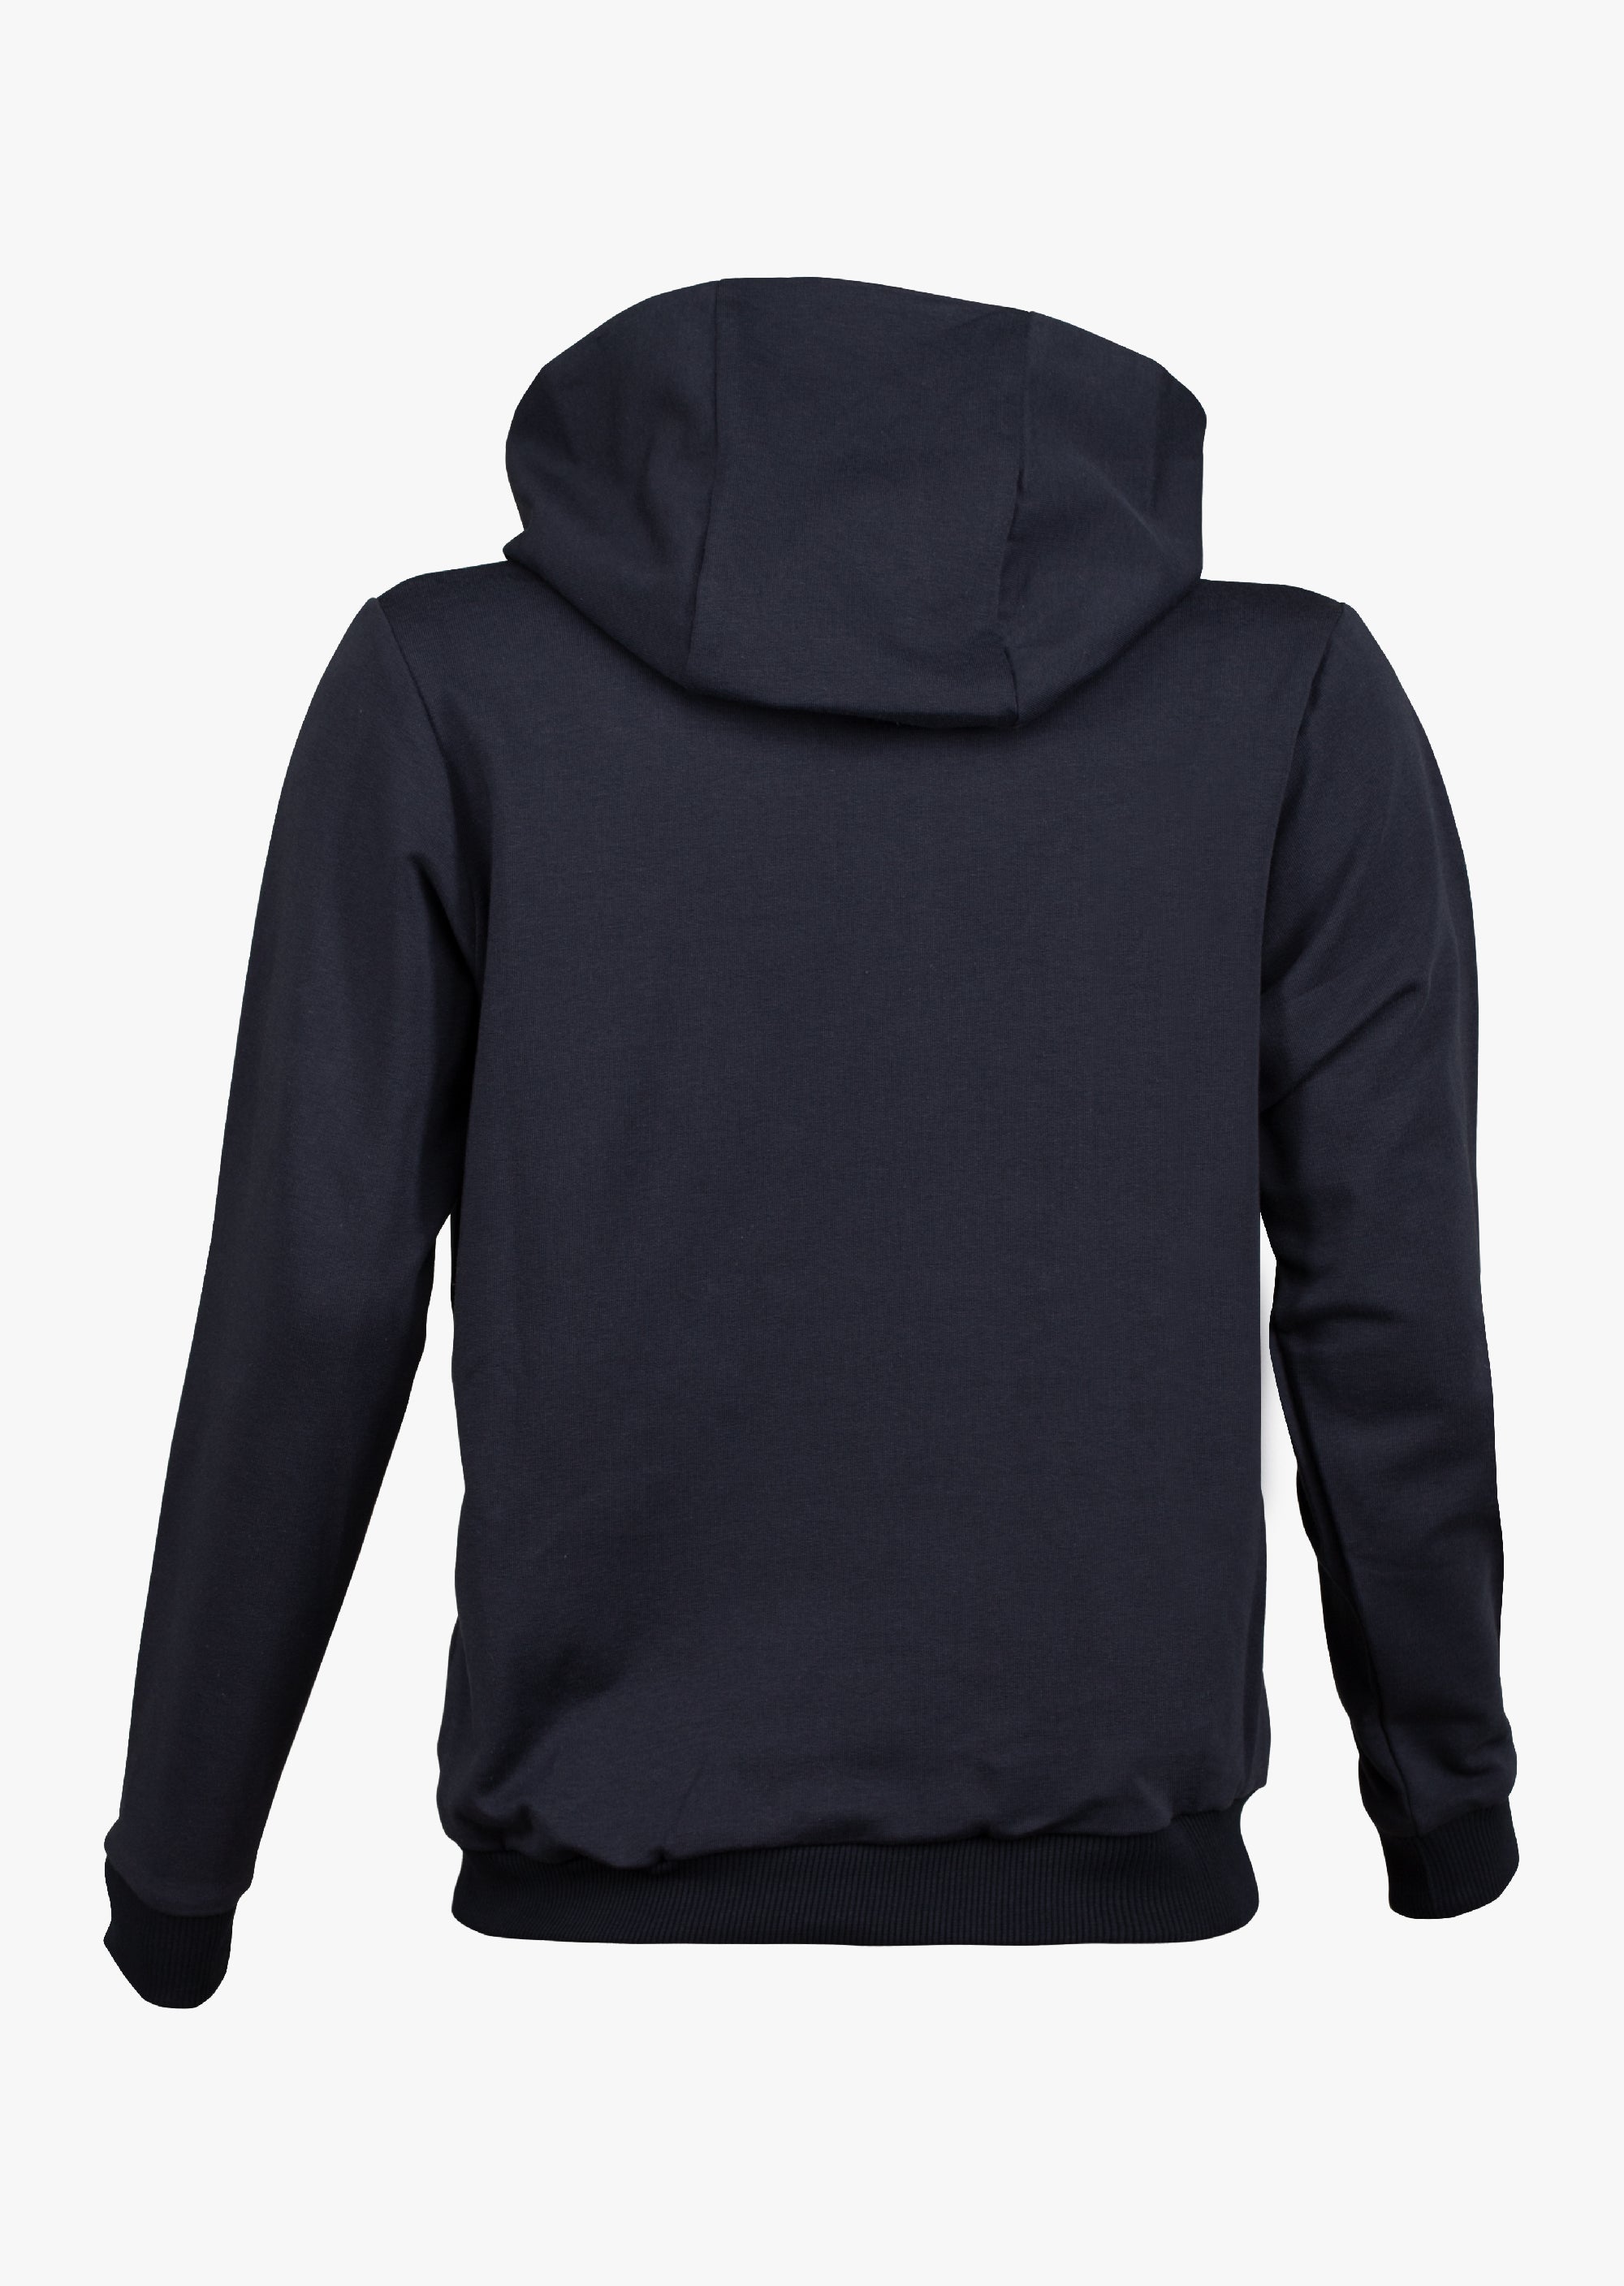 Loose-fitting hoodie made of soft cotton with logo BEGGANI